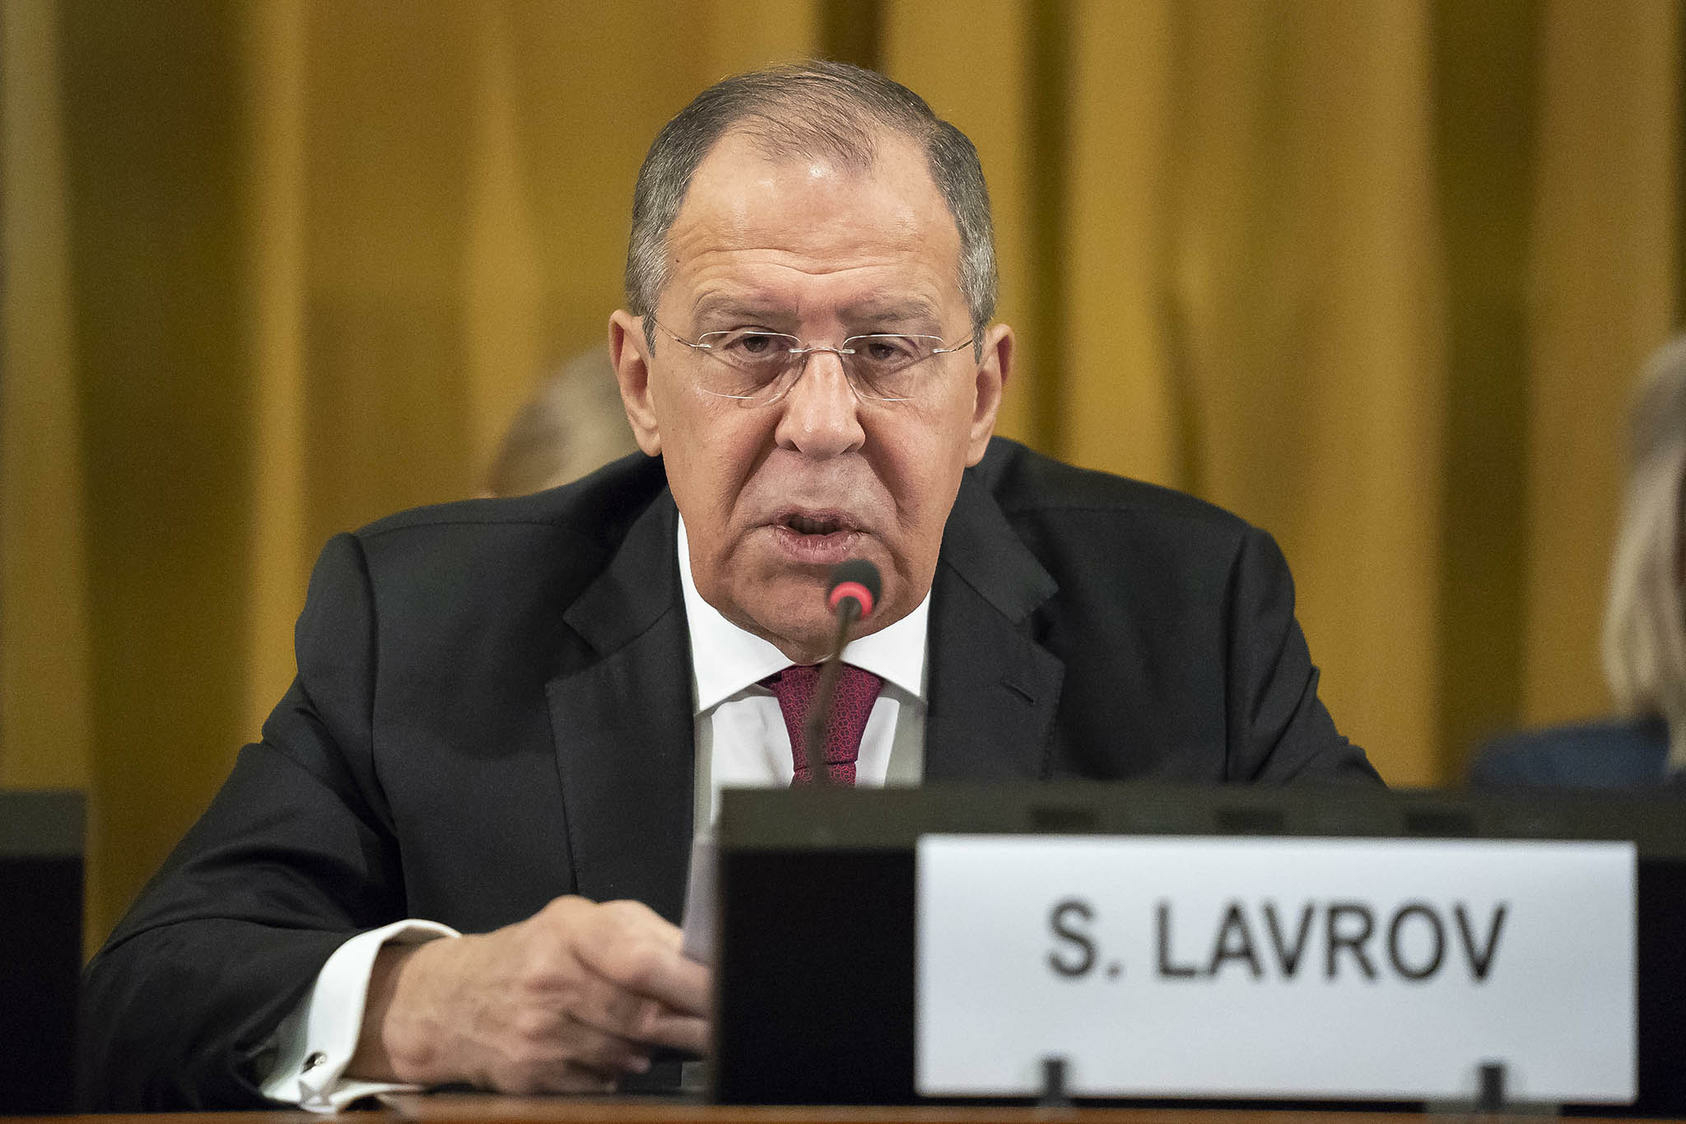 Amid the war in Ukraine, Russia's Lavrov goes on the diplomatic offensive